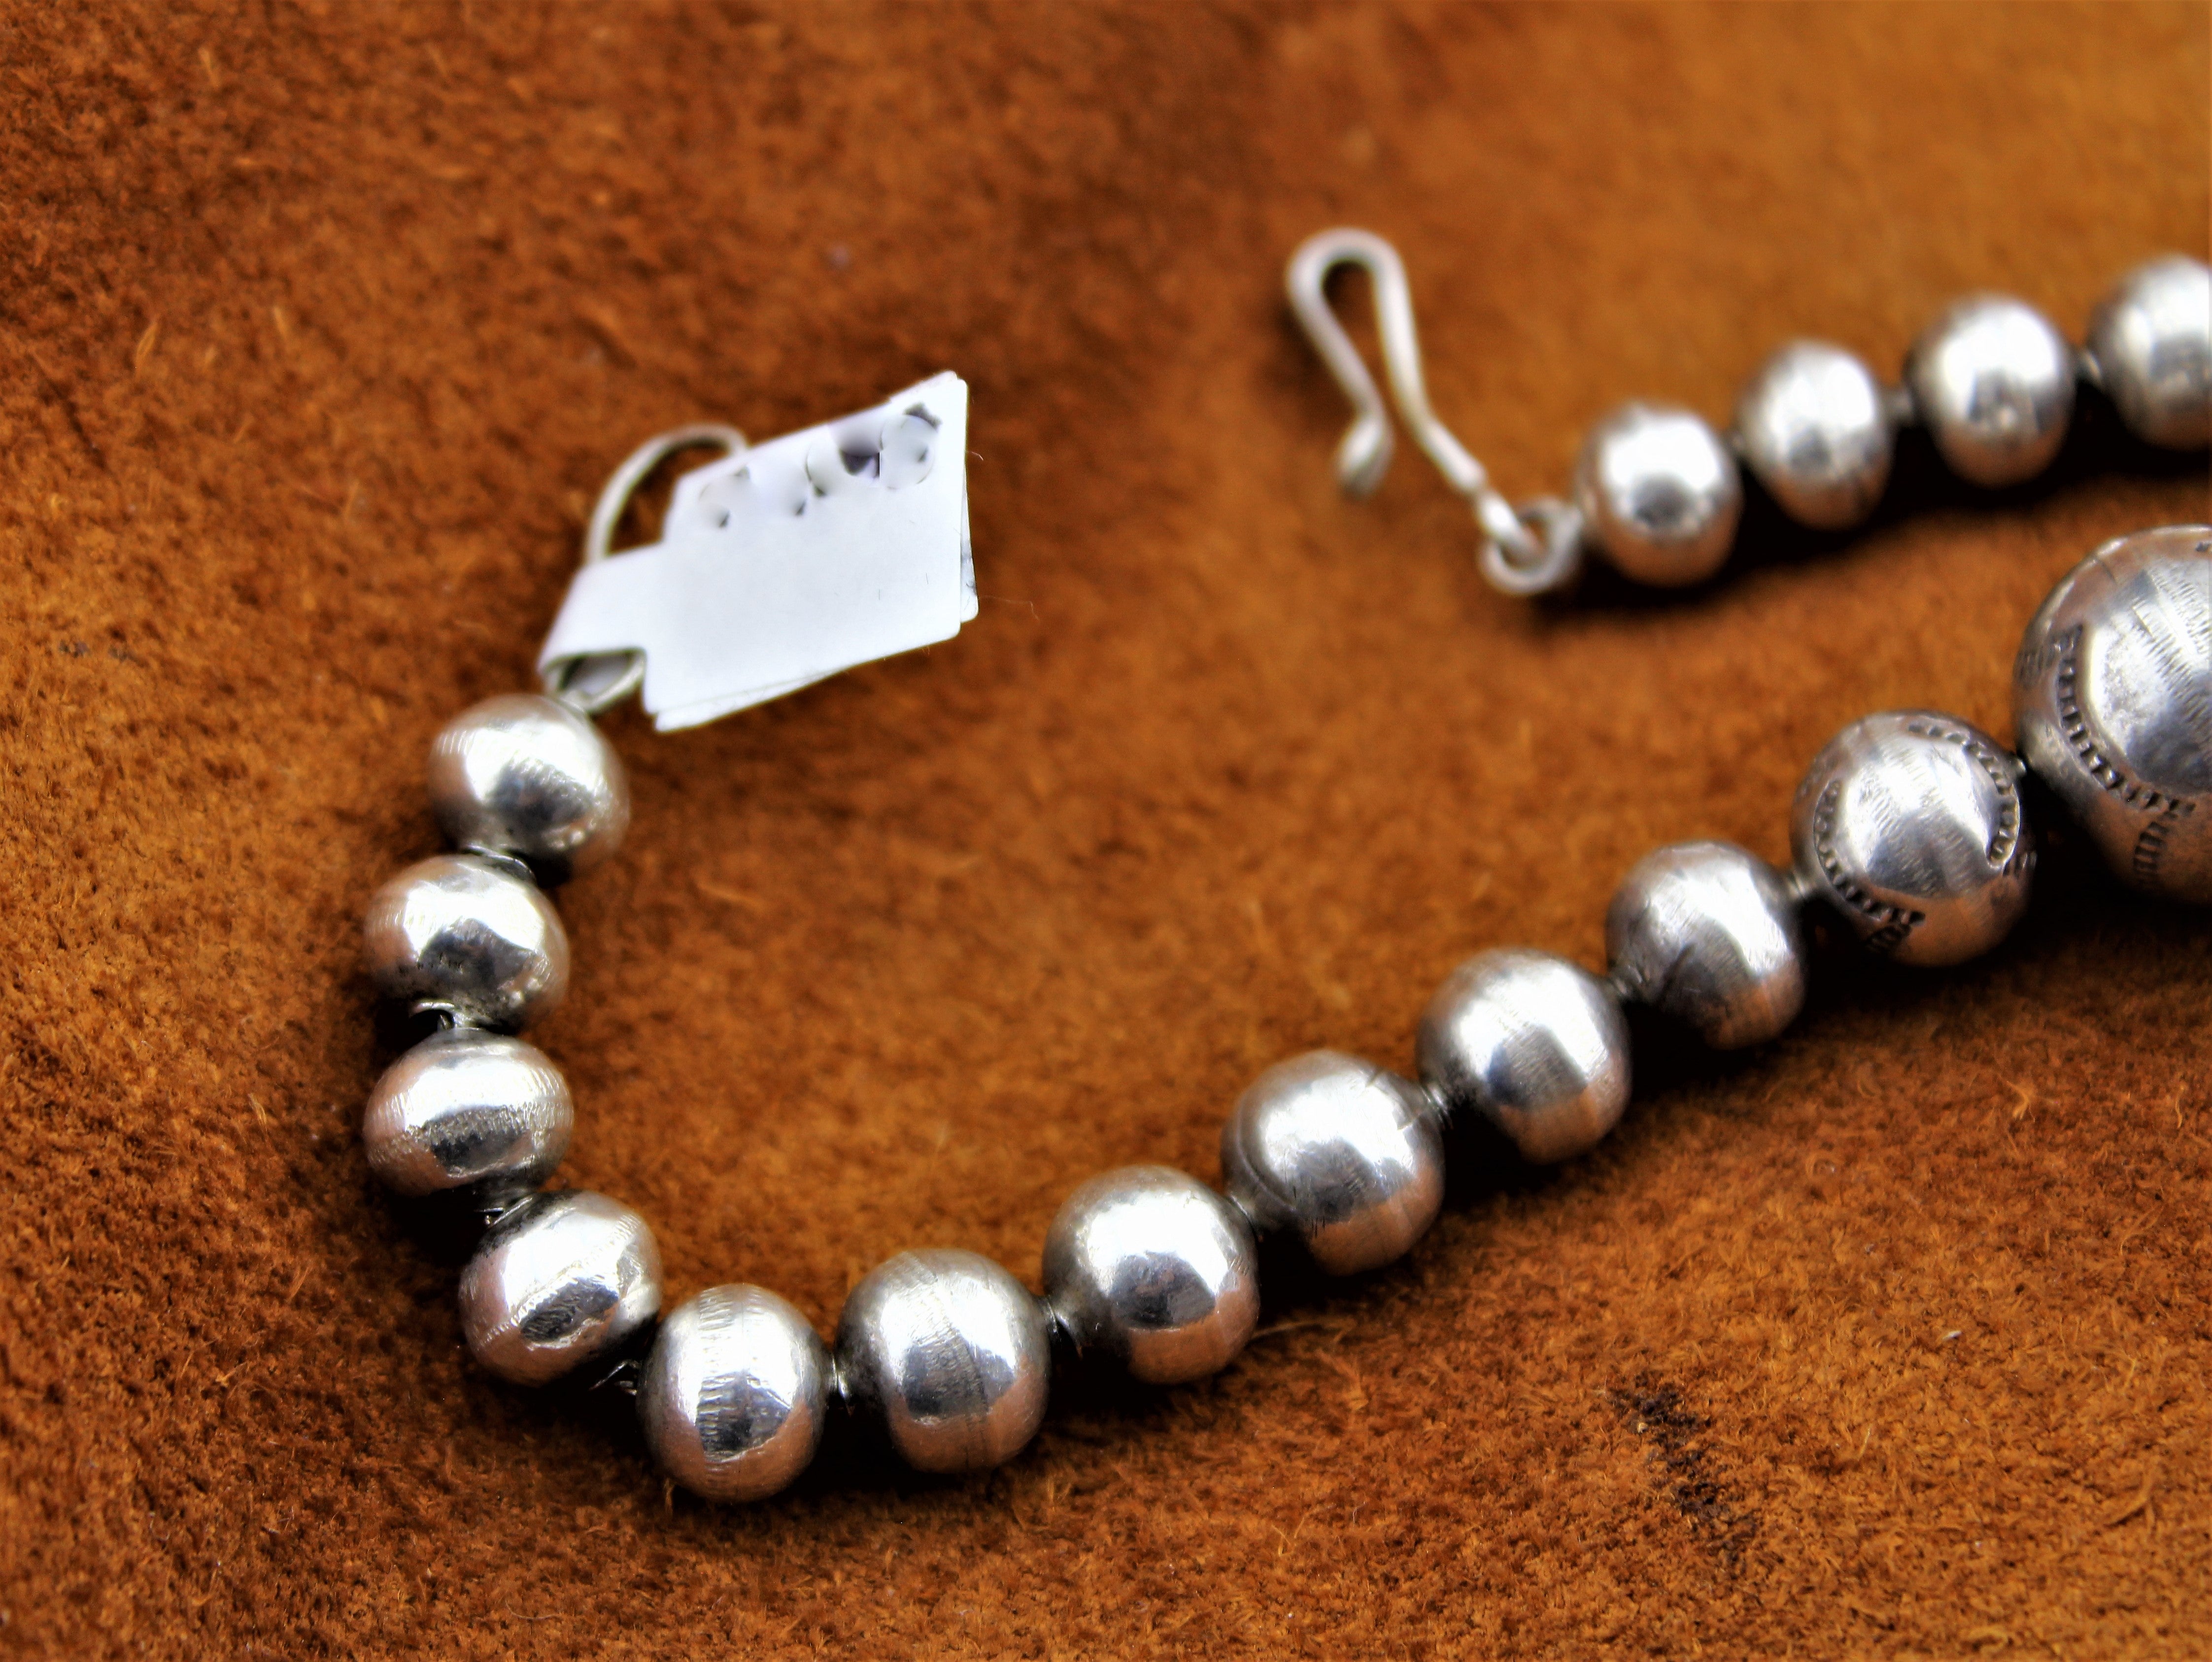 Sterling Silver Graduated Beads Necklace